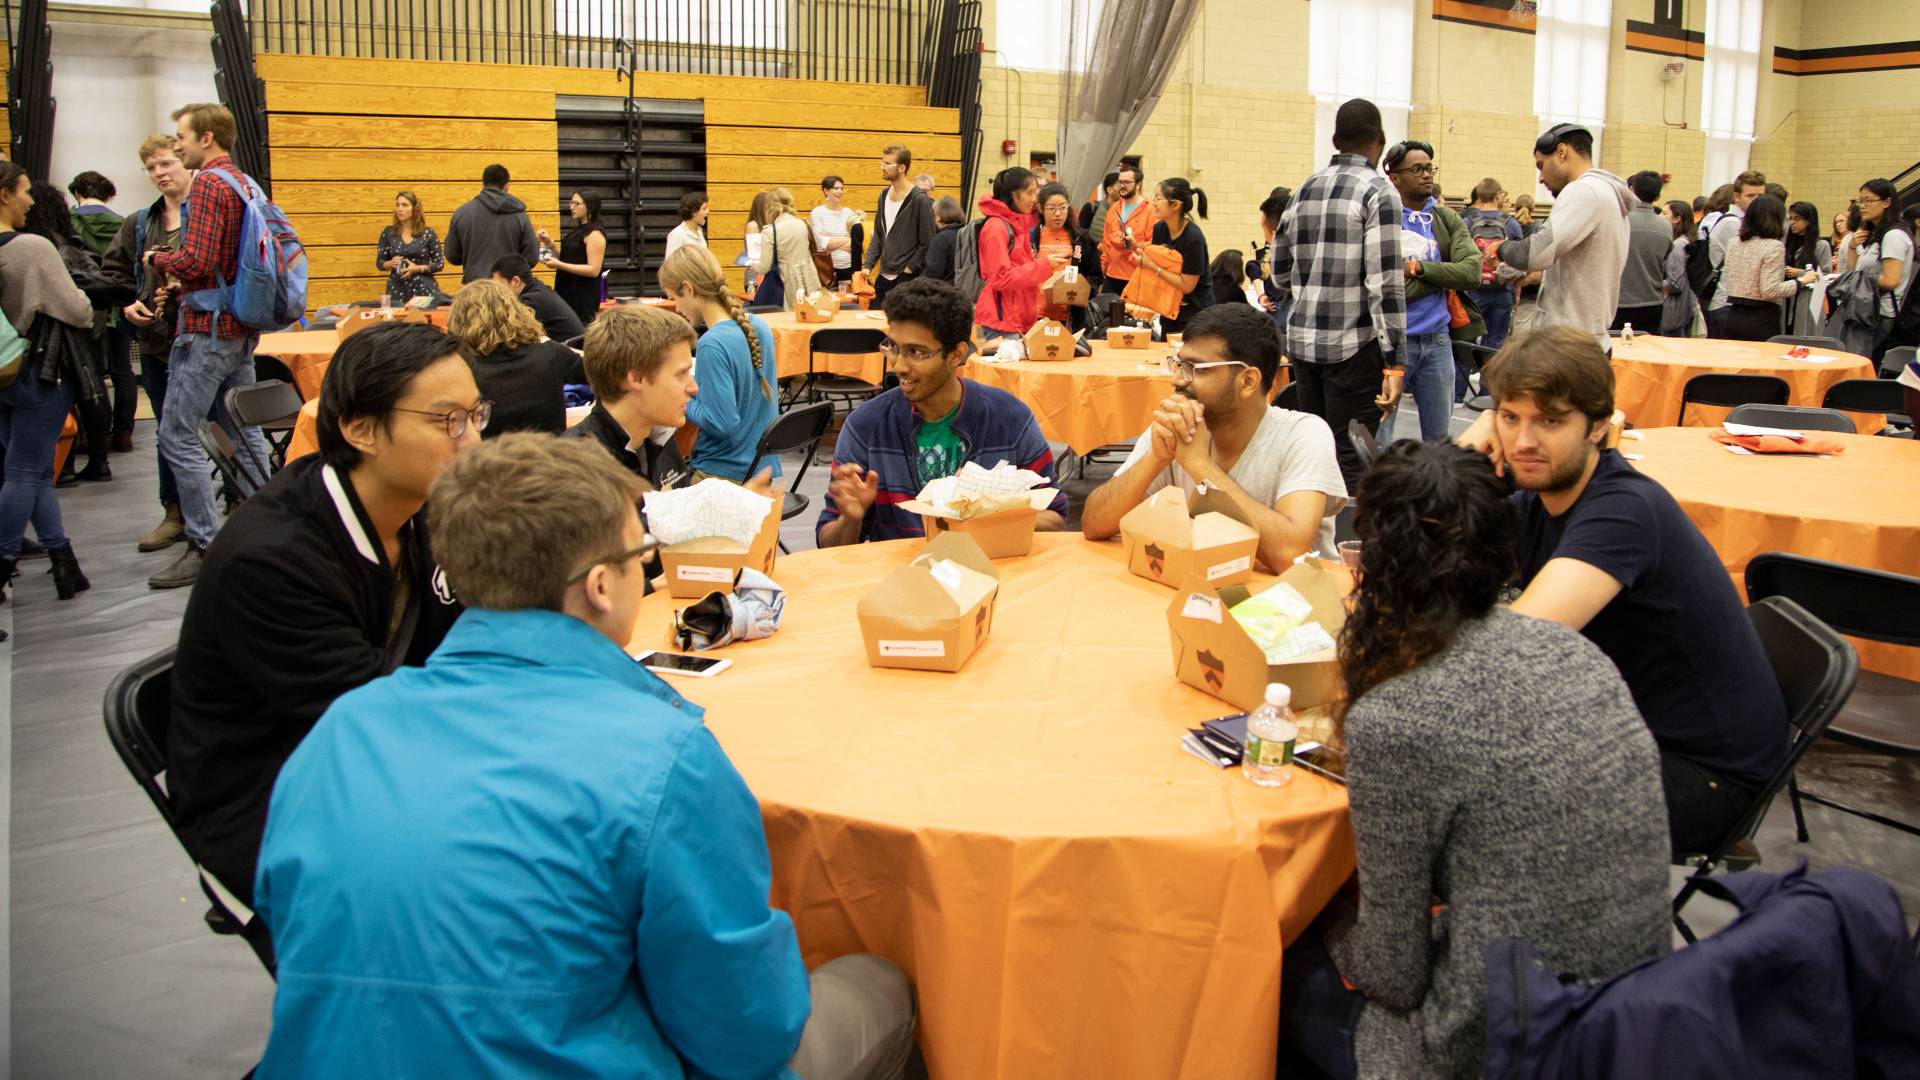 Graduate students eating lunch during orientation event